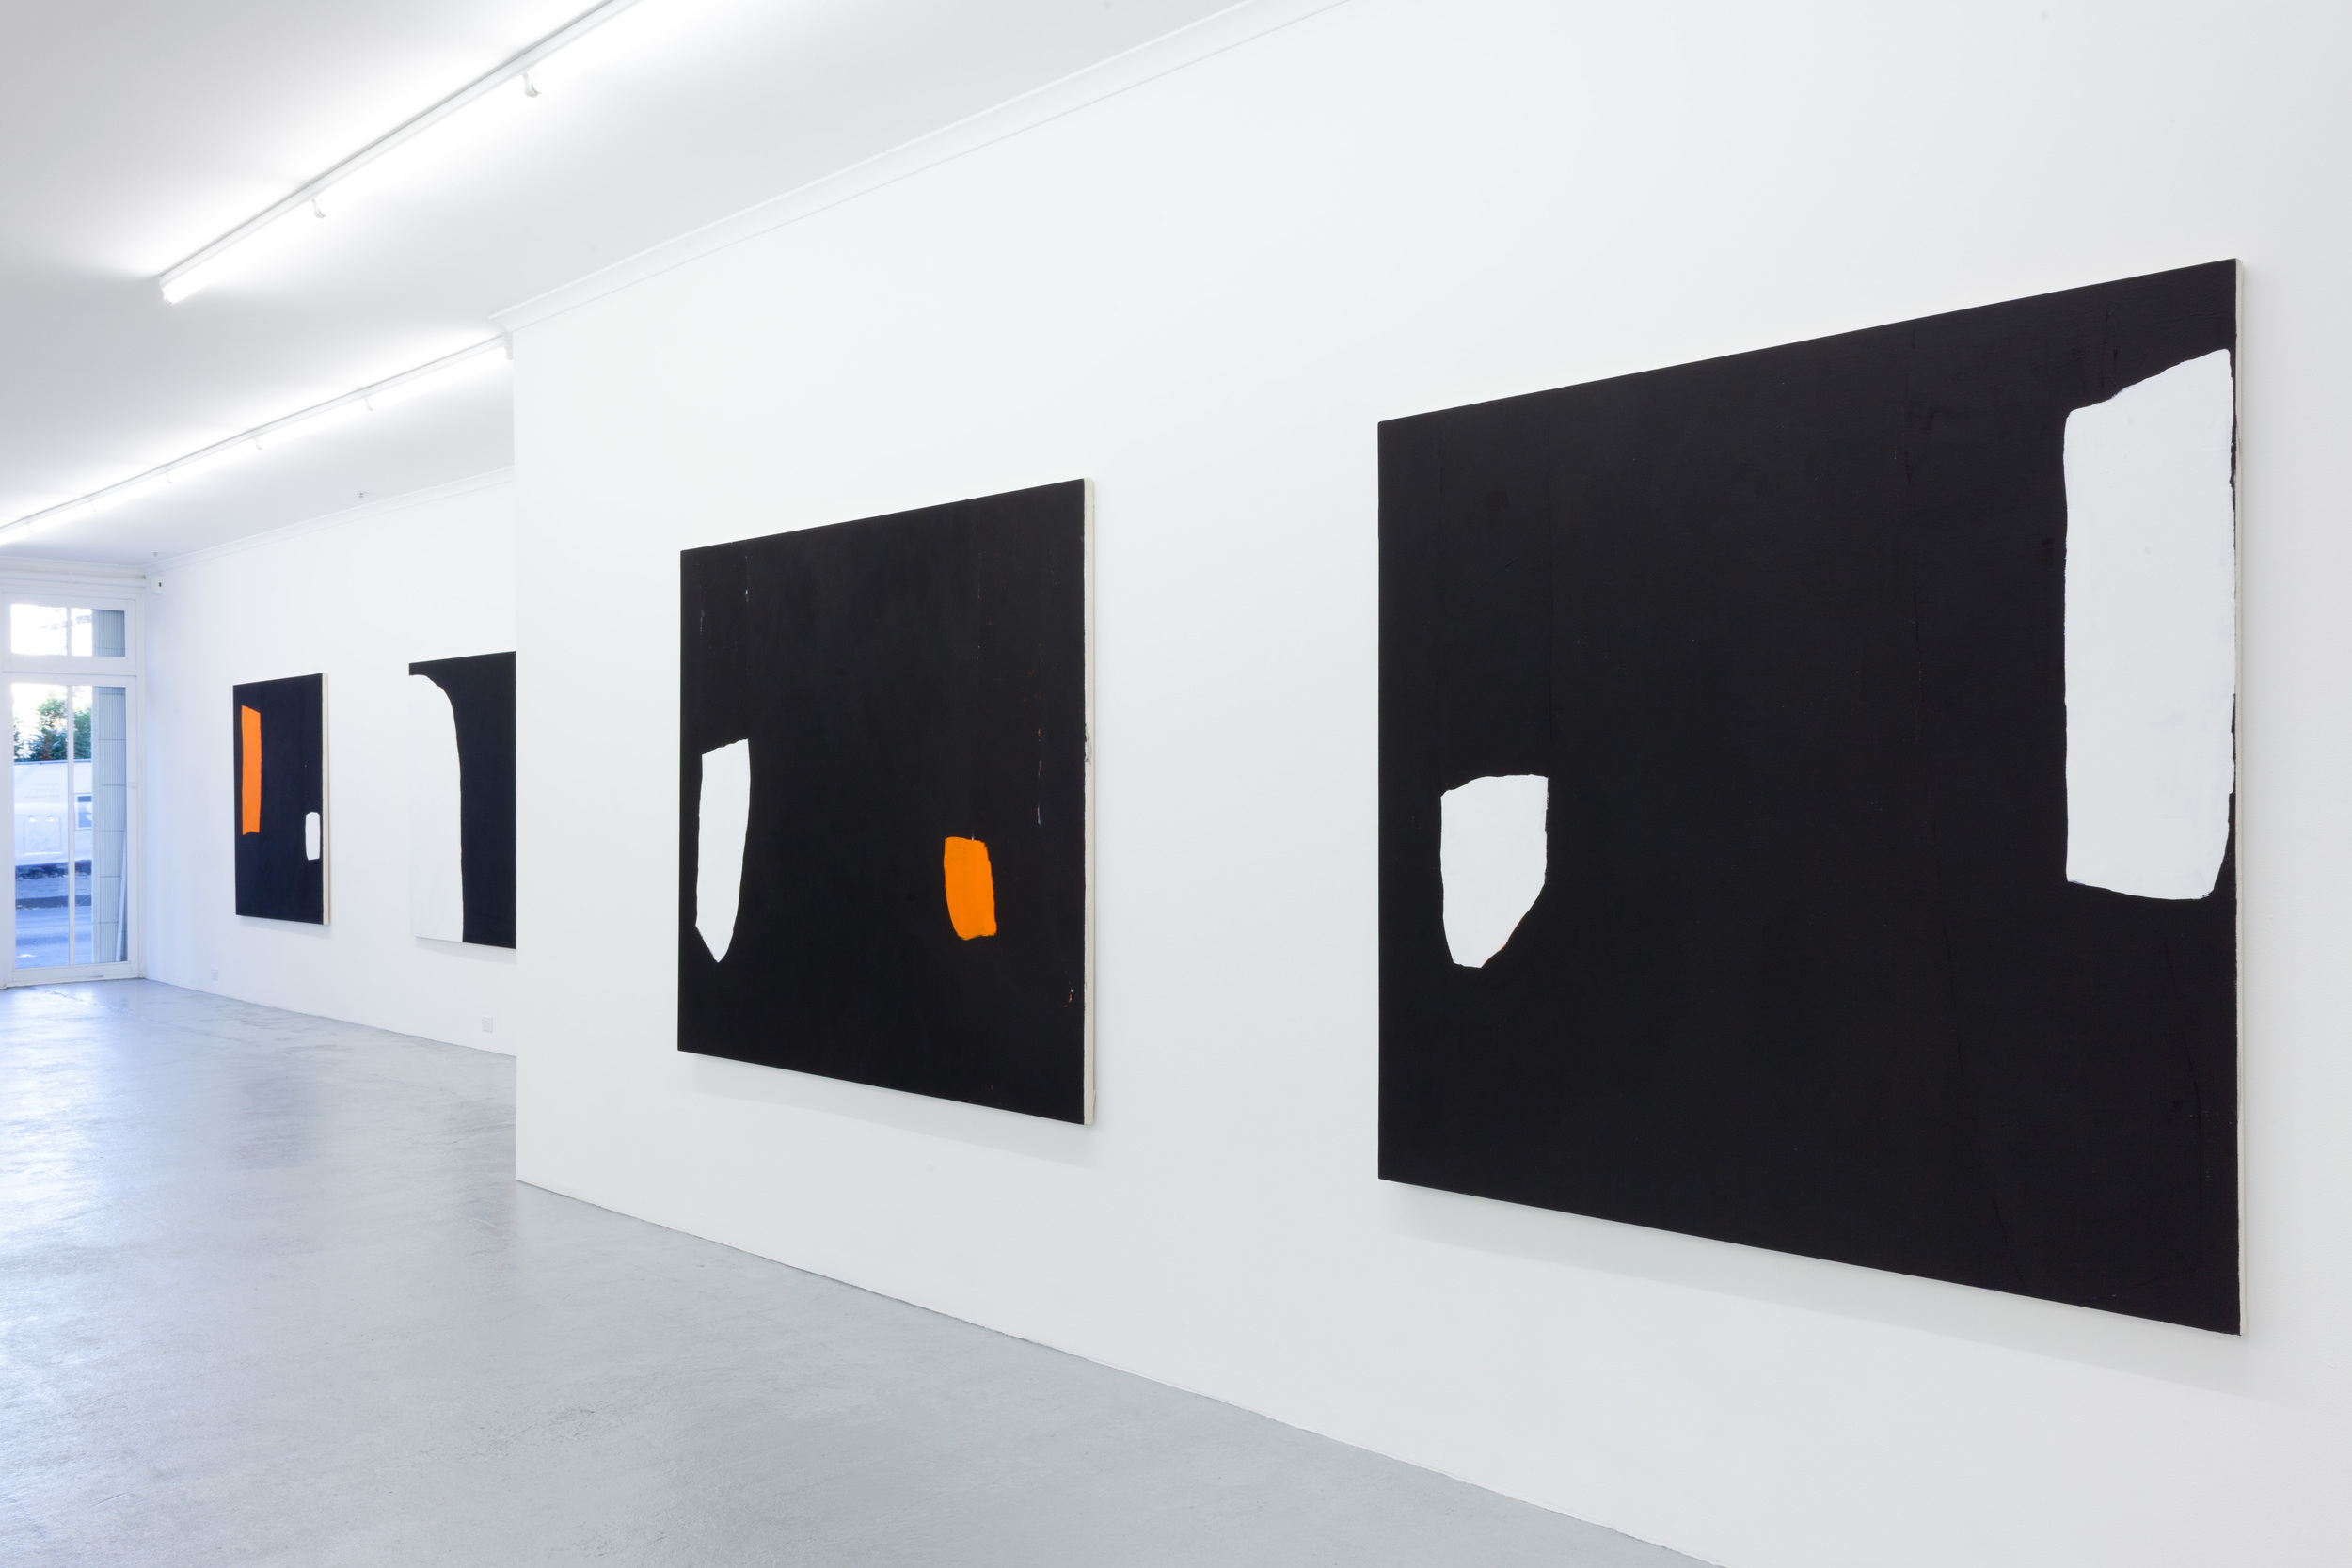  Hayley Megan French,&nbsp; See Where it Drifts , installation view, Galerie pompom. Photography by docQument. 